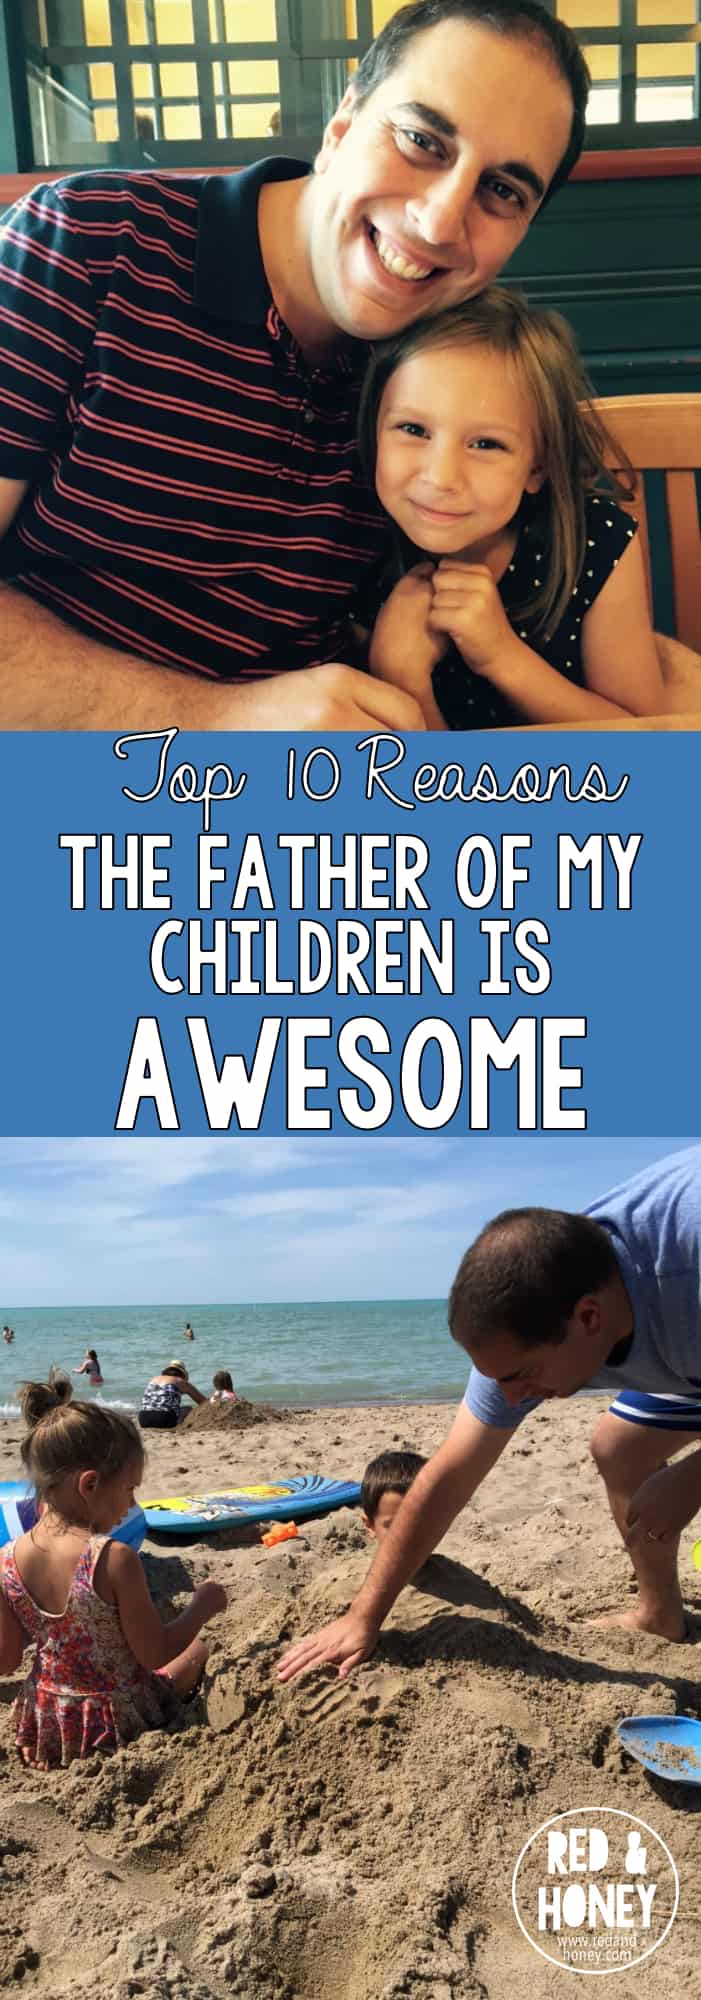 Top 10 Reasons the Father of My Children is Awesome - R&H pin